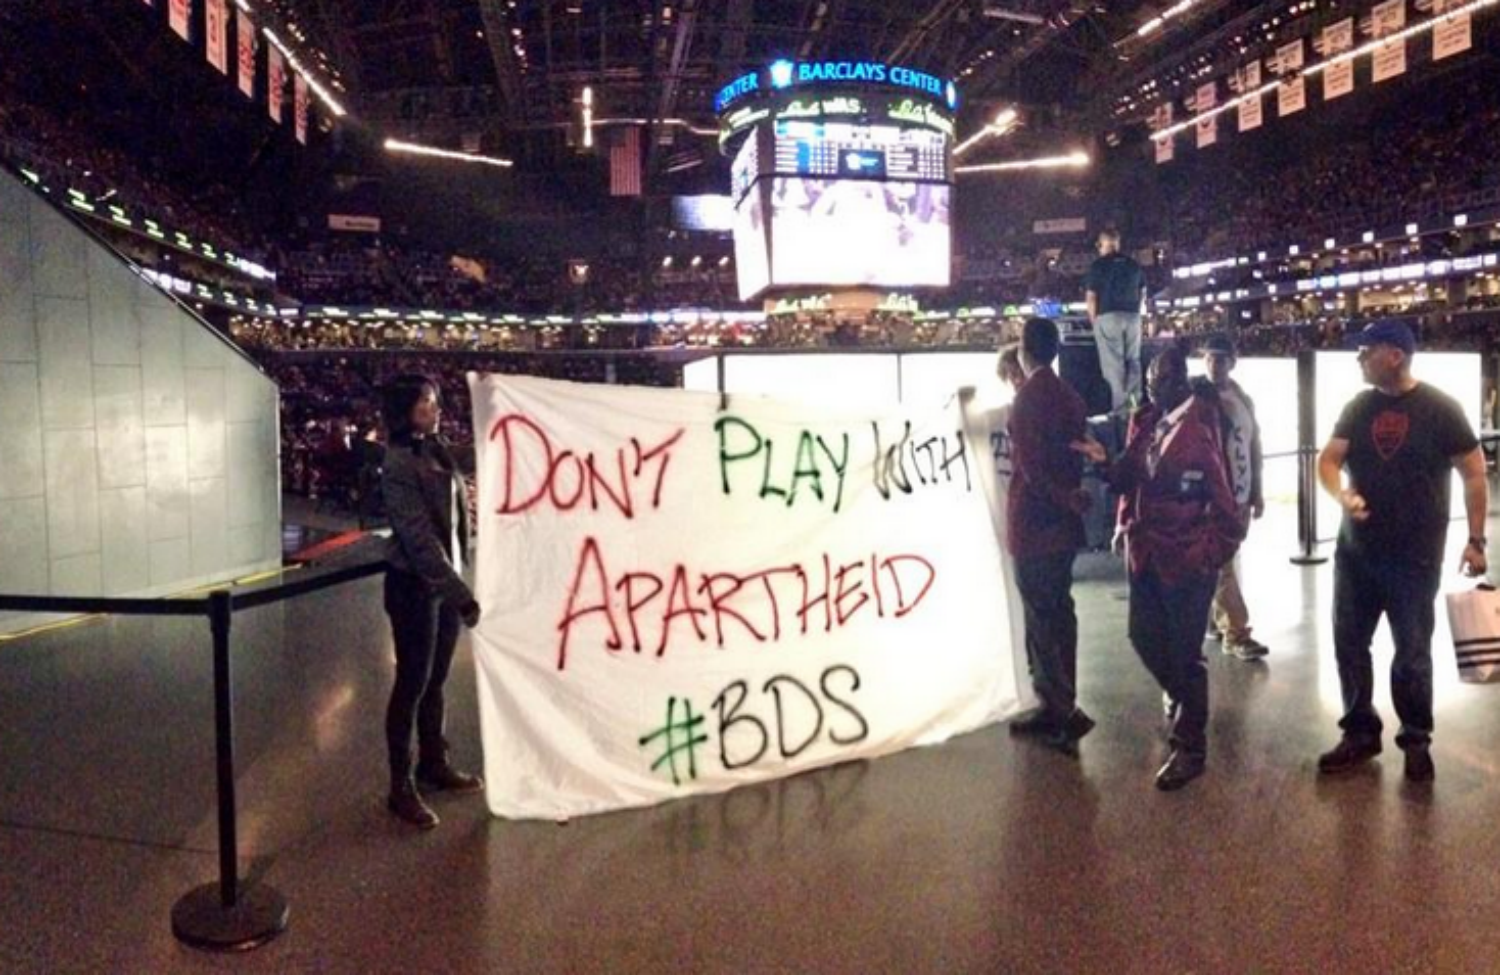 ‘Israel’s War On Gaza Is Not A Game’: Scenes From the NBA Preseason Protest